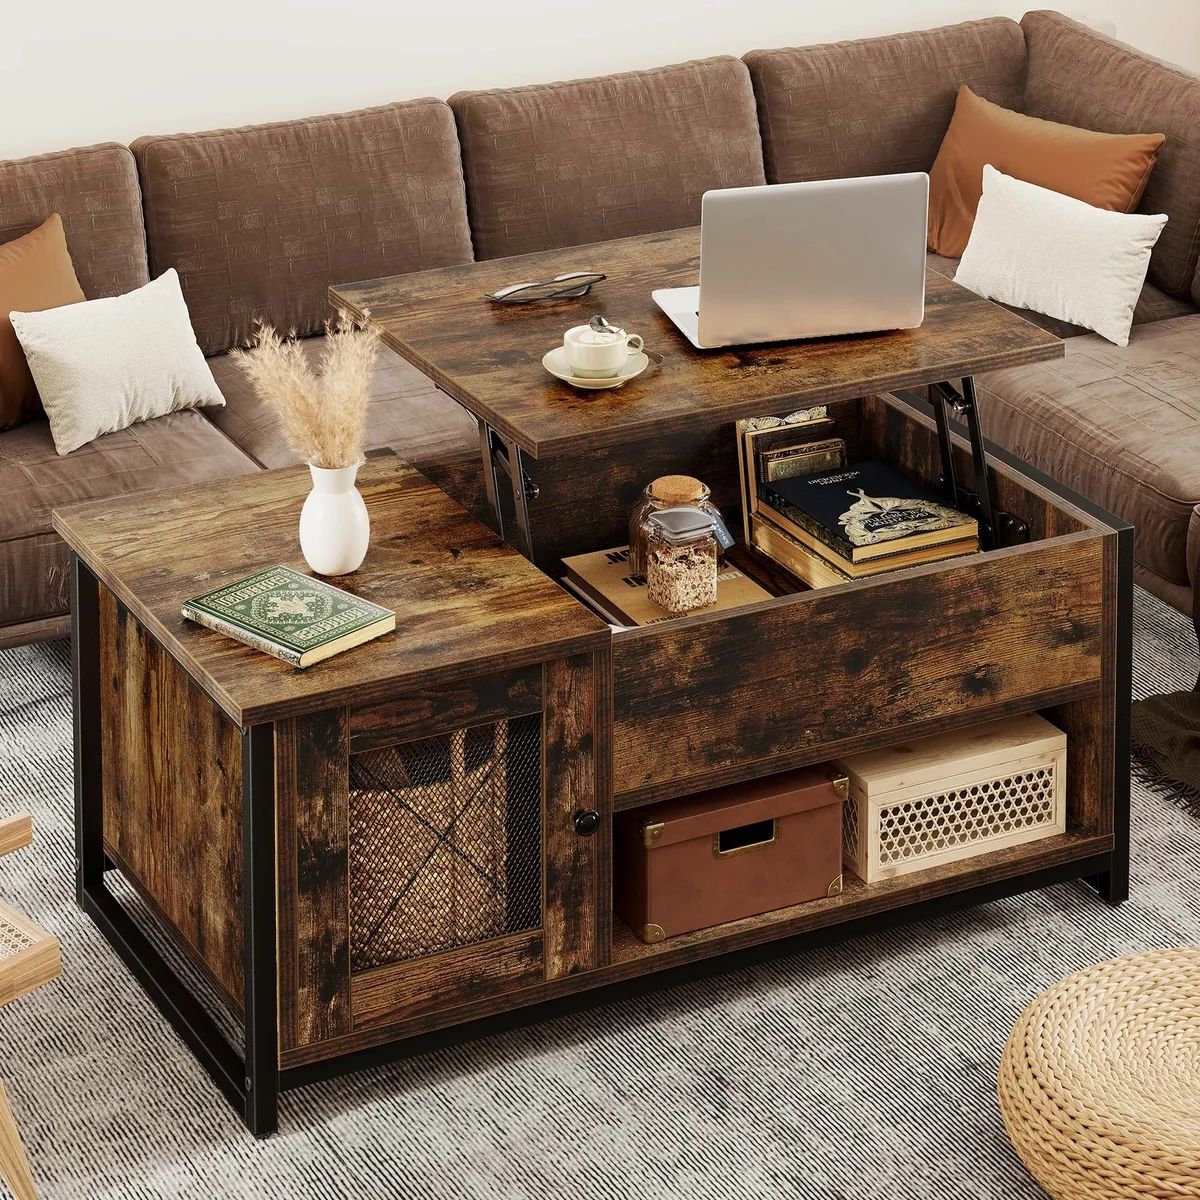 Latest Lift Top Coffee Tables With Shelves Pertaining To Farmhouse Lift Top Coffee Table With Hidden Compartment And Storage Shelf  Brown (View 6 of 10)